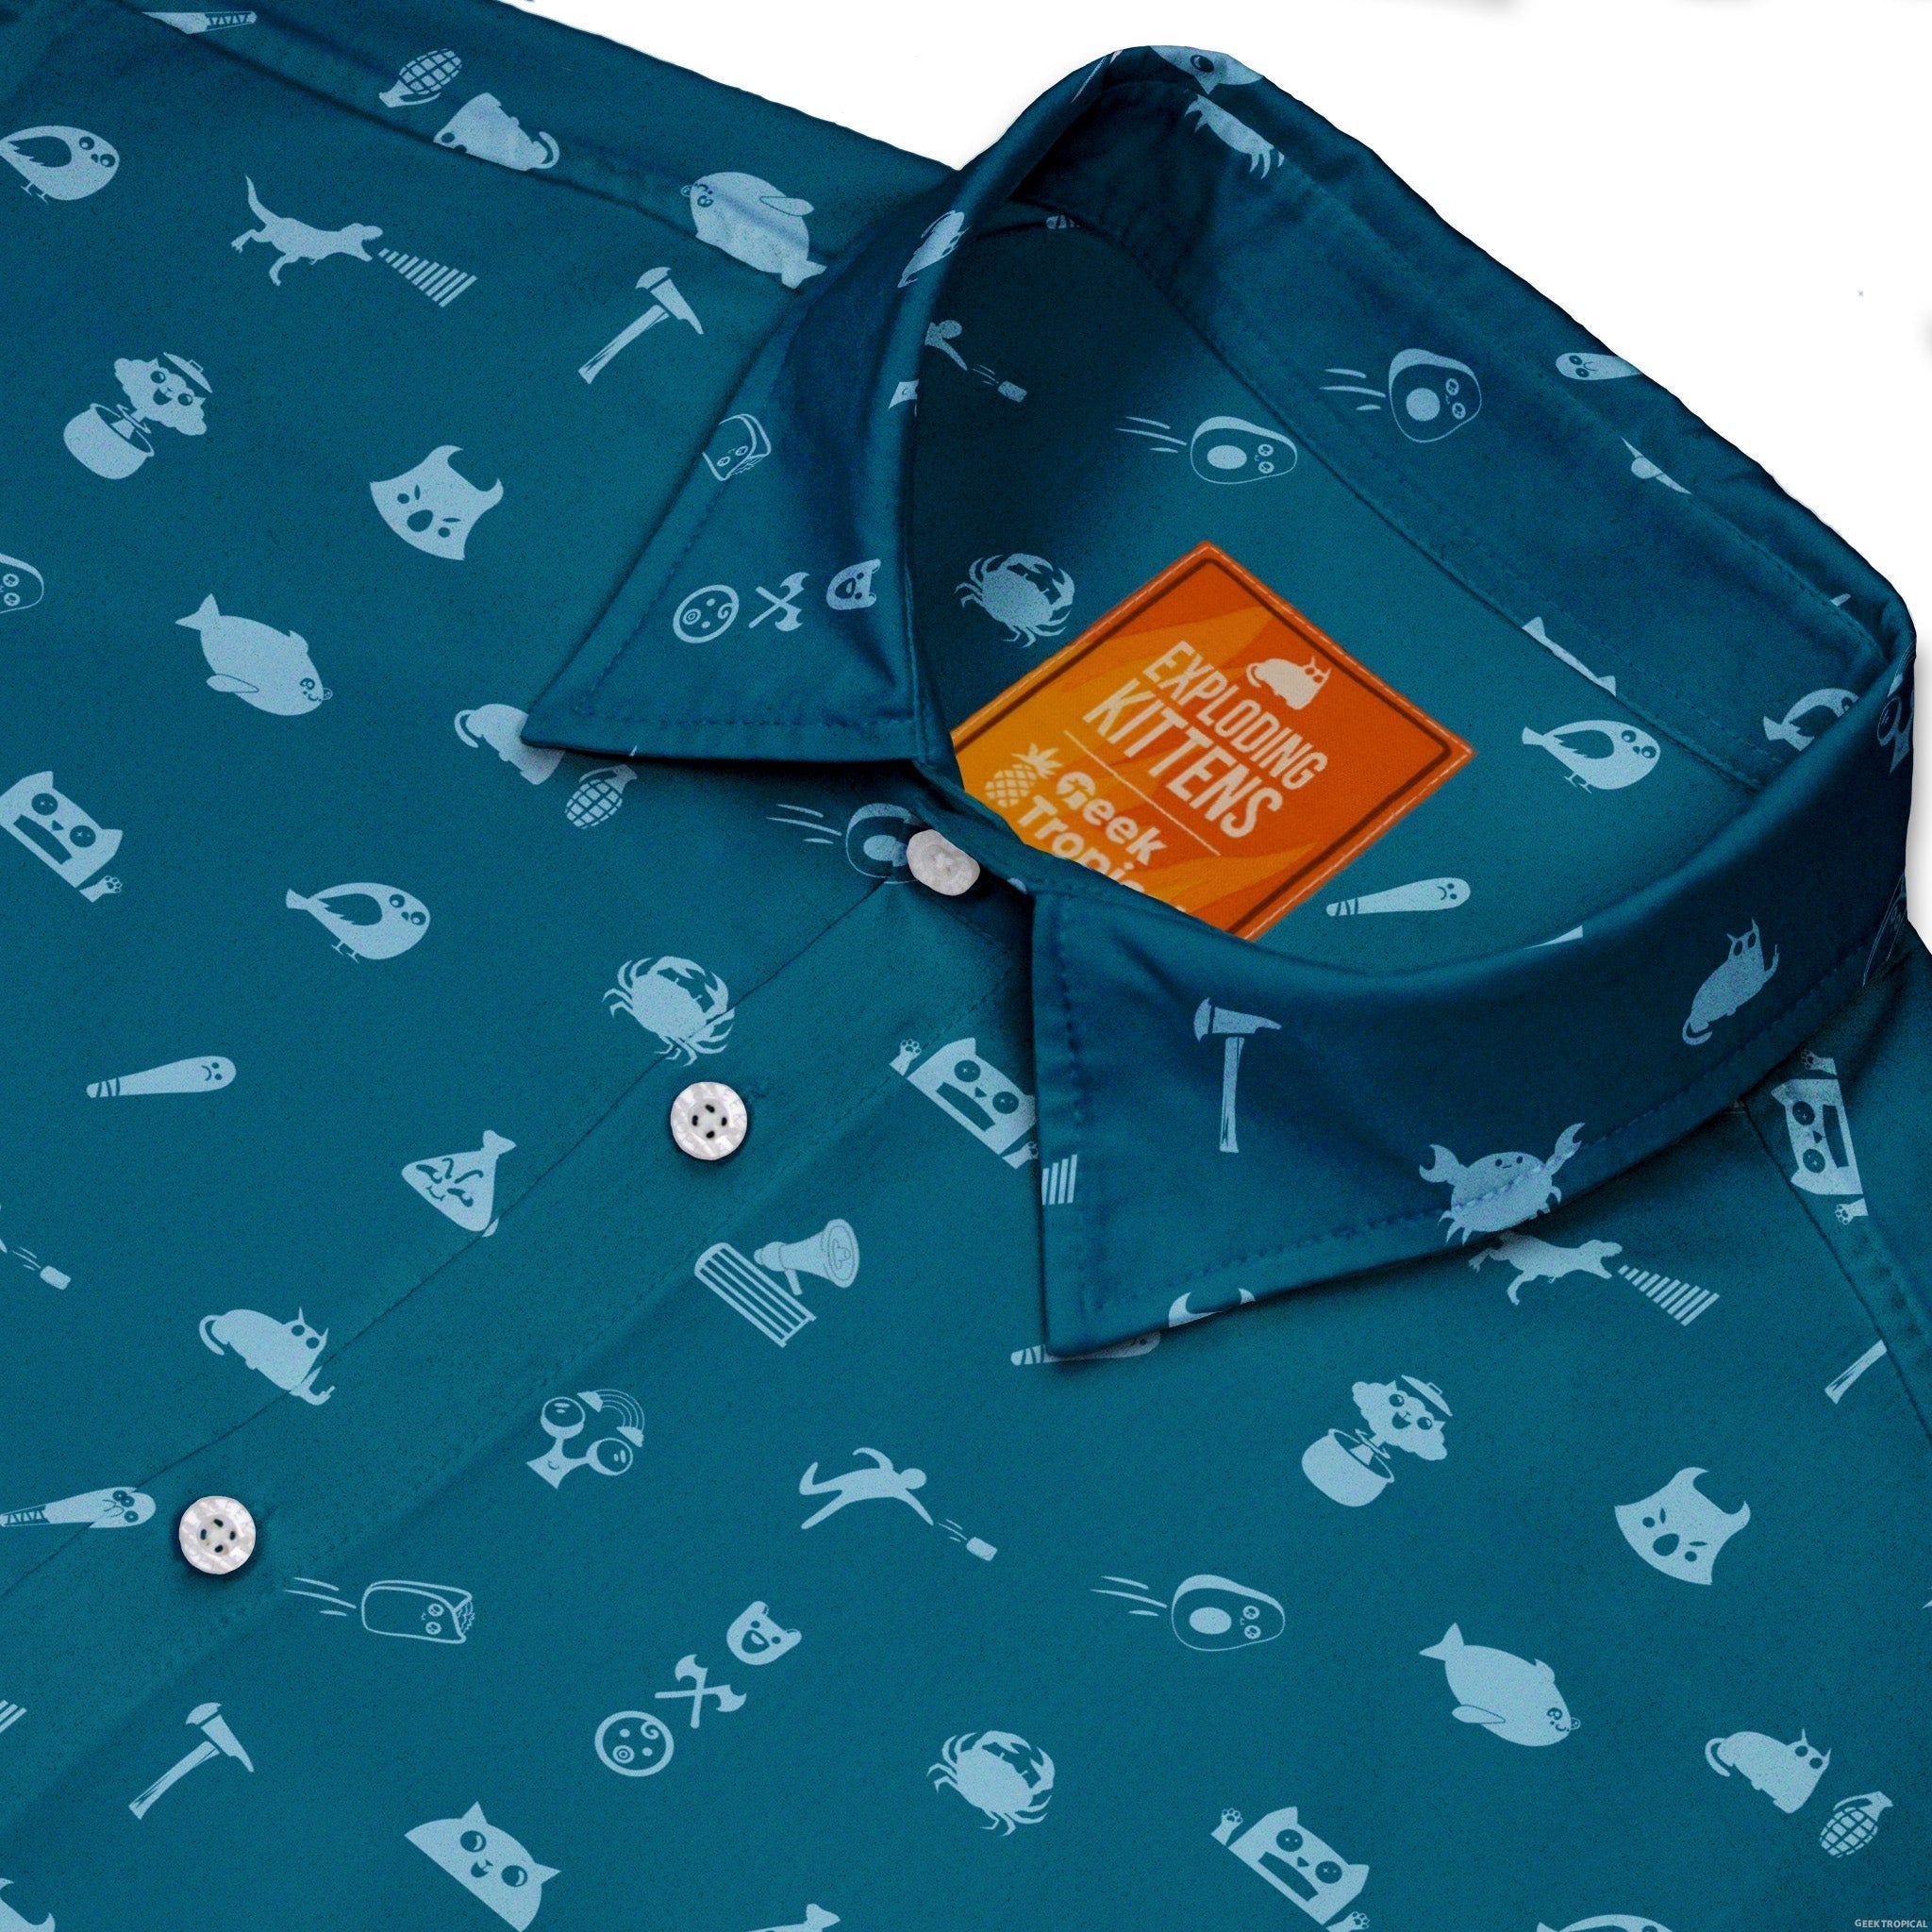 Iconic Exploding Kittens Button Up Shirt - adult sizing - Animal Patterns - board game print